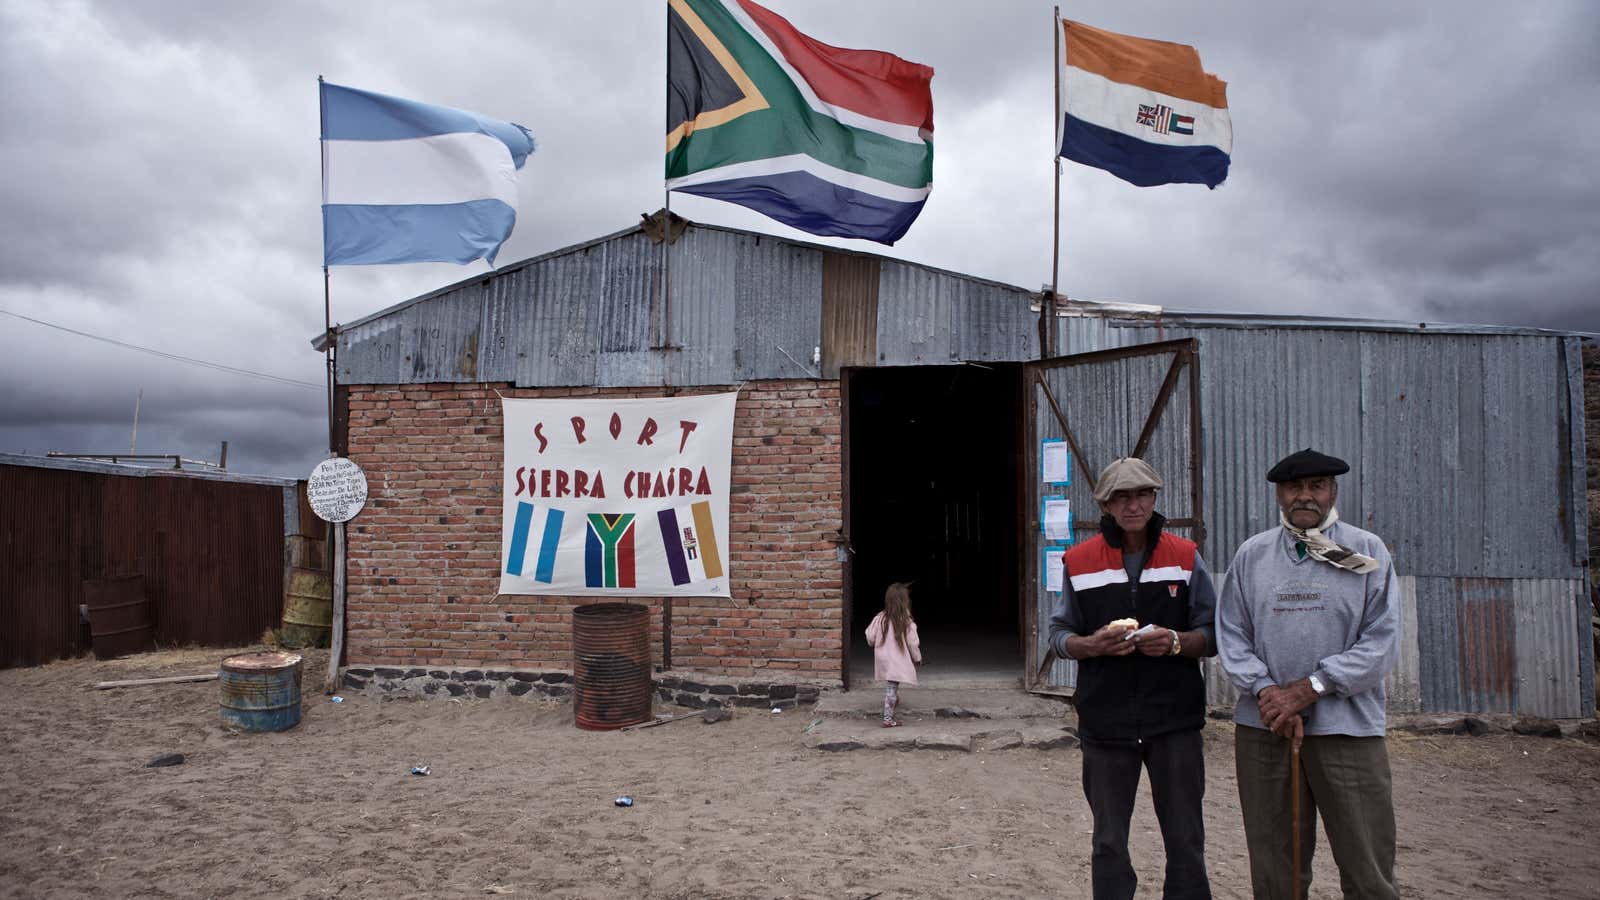 Older members of the community still speak Afrikaans, though their dominant language is Spanish.